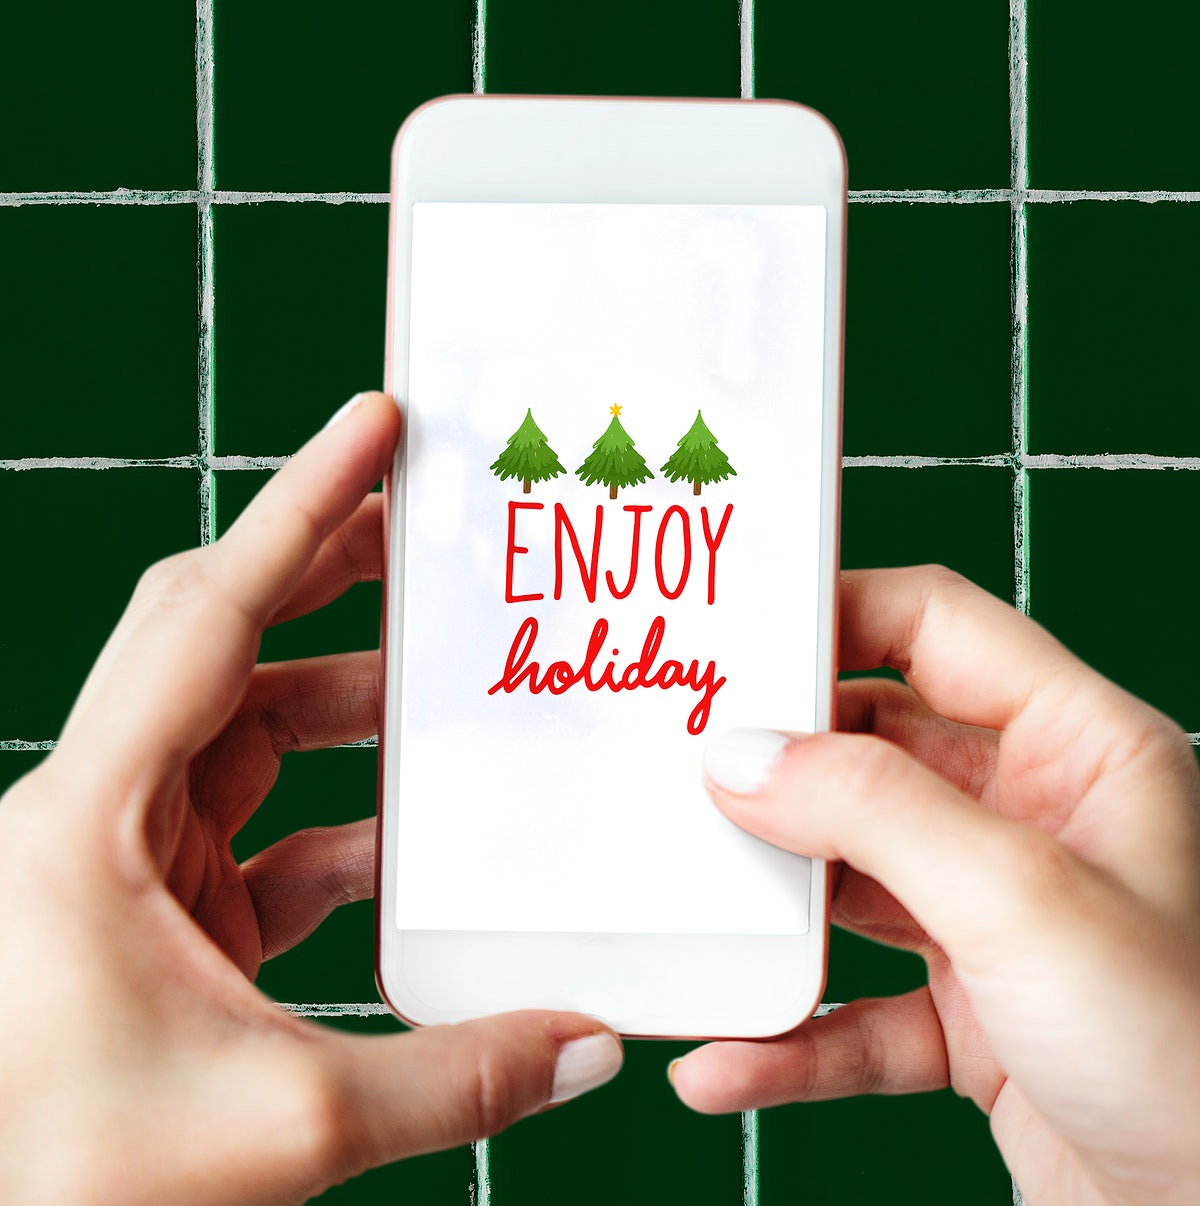 Free Enjoy Holiday On A Mobile Phone Screen Mockup